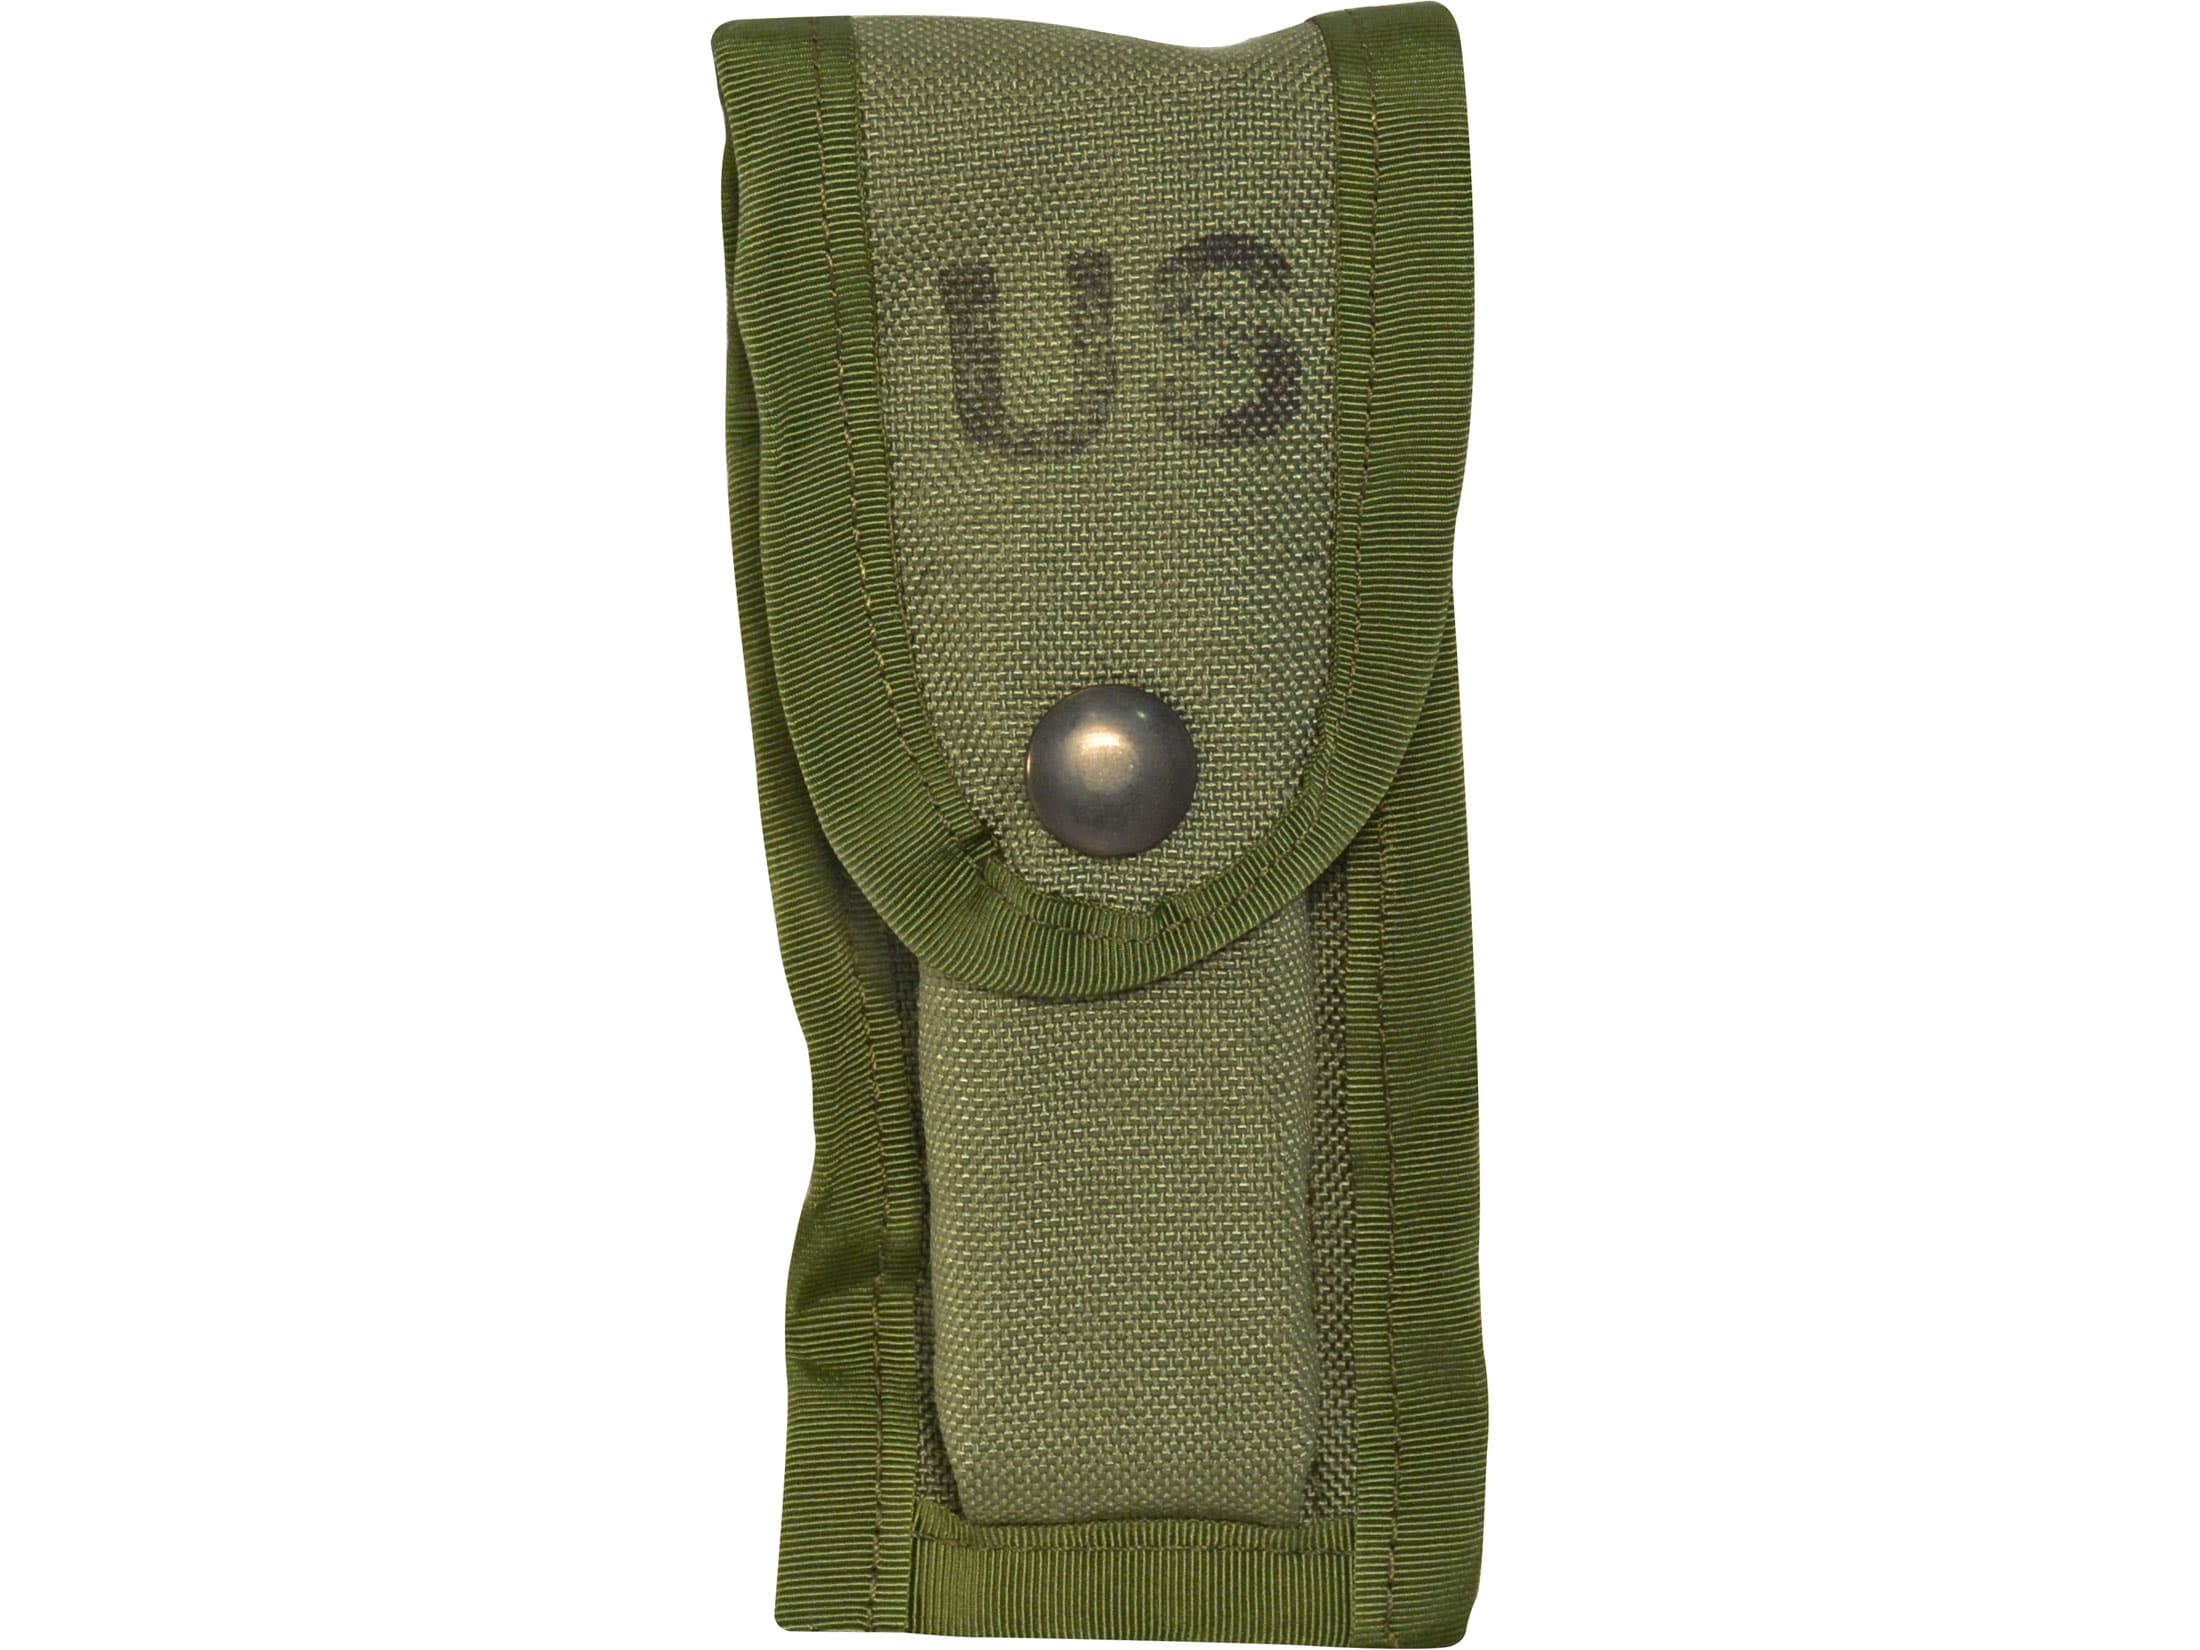 Olive Drab 9MM Mag Pouch with ALICE clips NEW WITH TAG NSN 1005-01-207-5573 NWT 